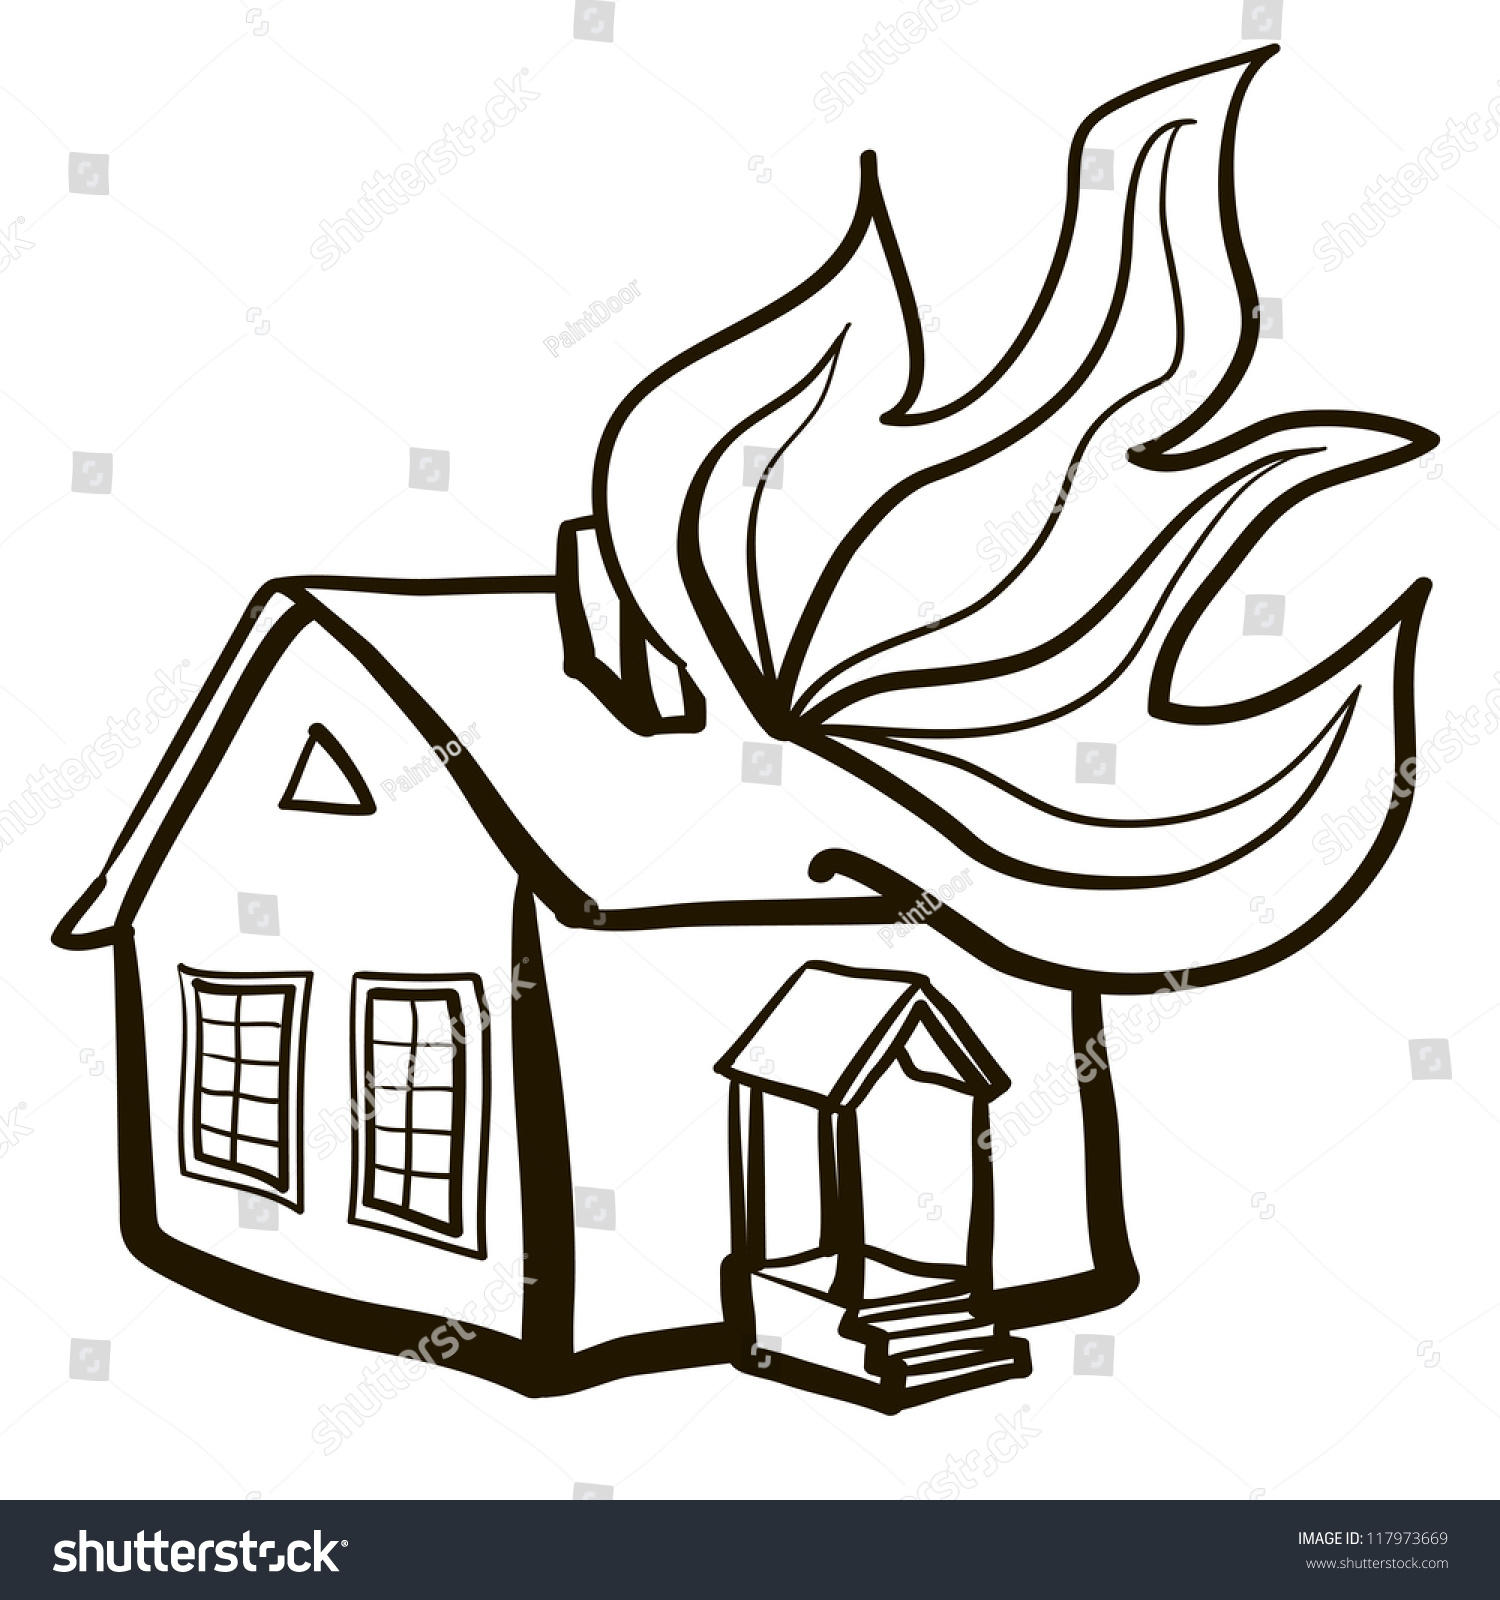 free clipart house on fire - photo #33